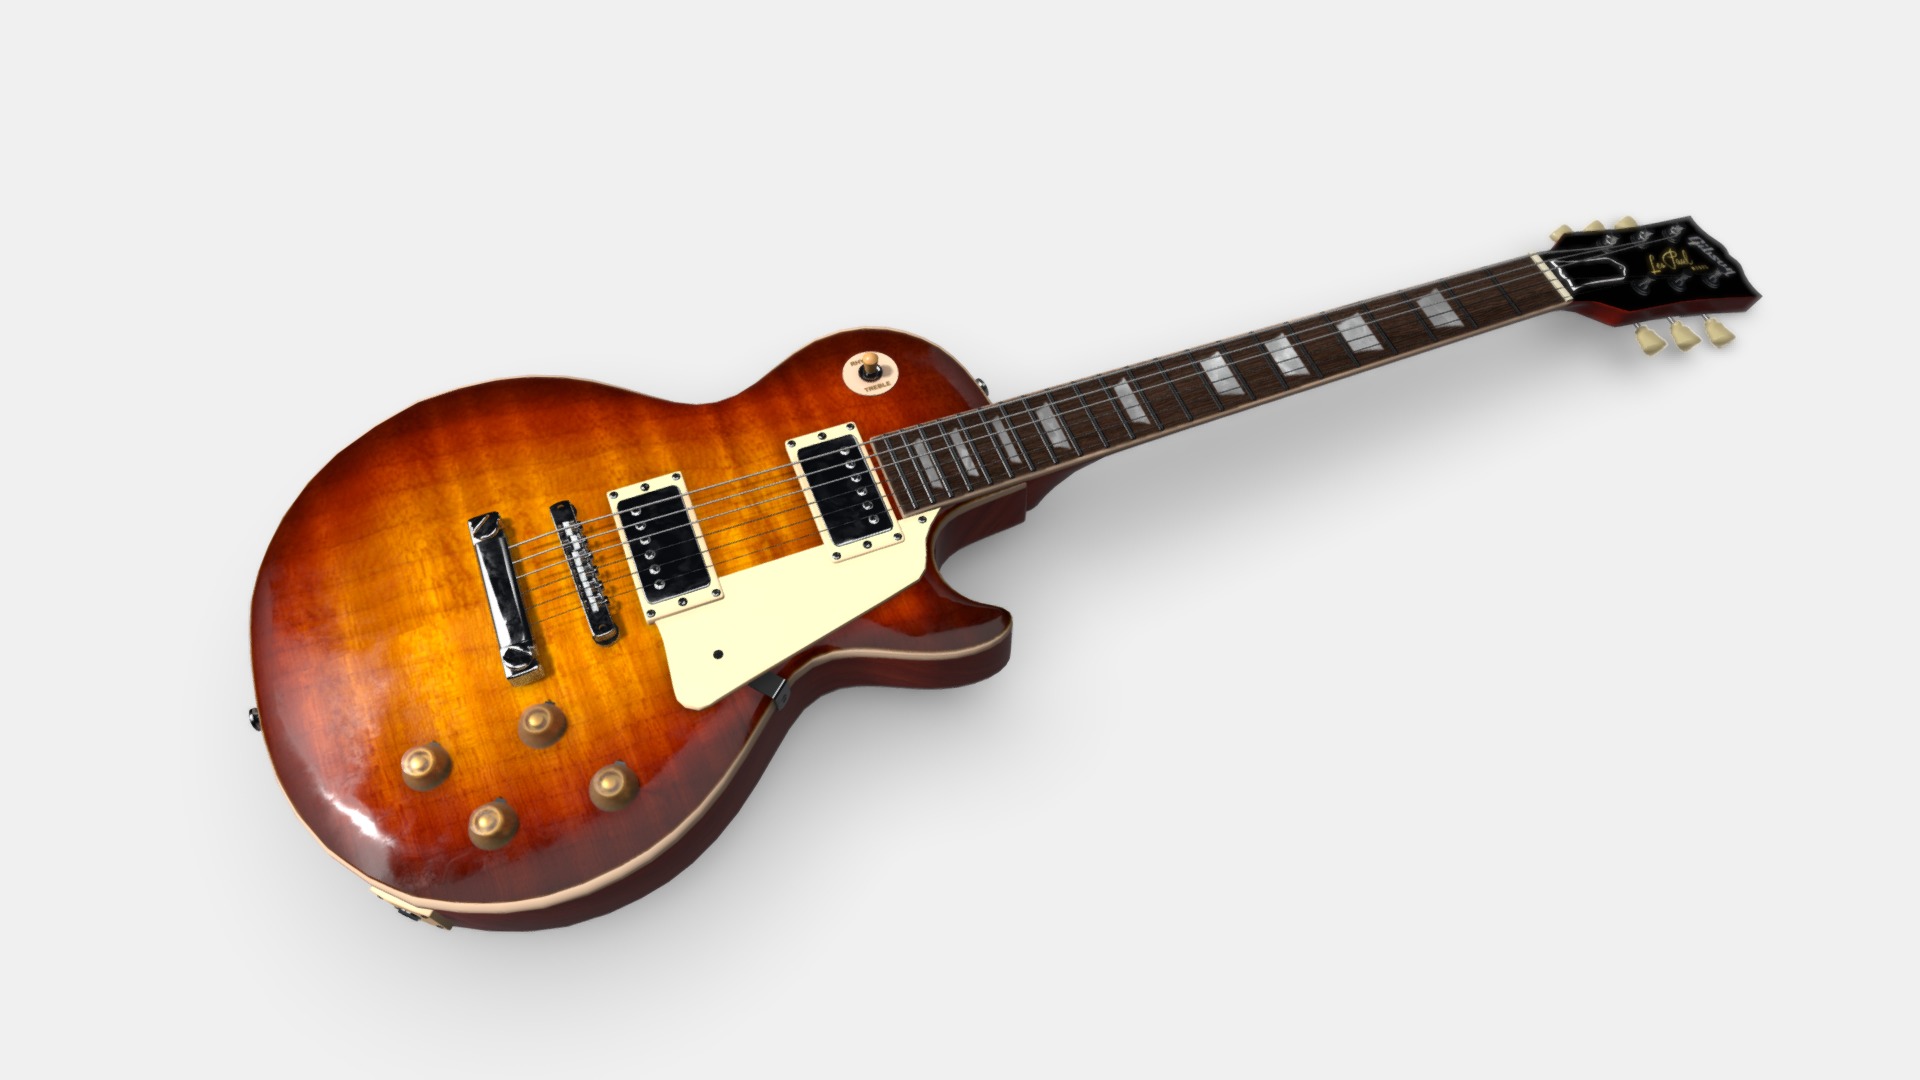 3D model Gibson Les Paul Standard 1959 Reissue - This is a 3D model of the Gibson Les Paul Standard 1959 Reissue. The 3D model is about a brown electric guitar.